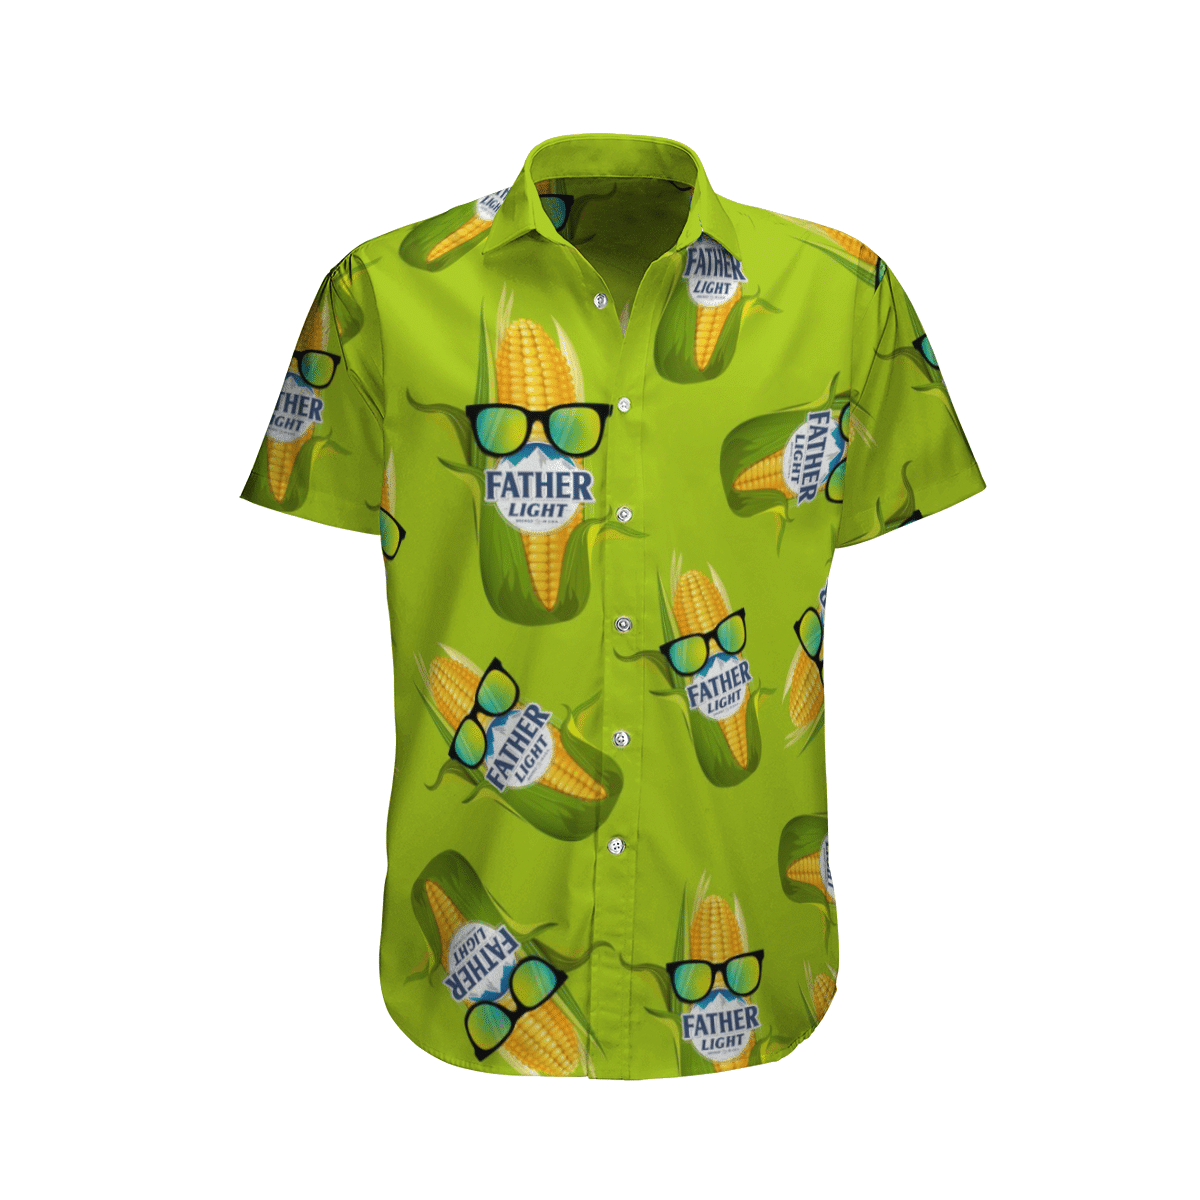 Top cool Hawaiian shirt 2022 - Make sure you get yours today before they run out! 8